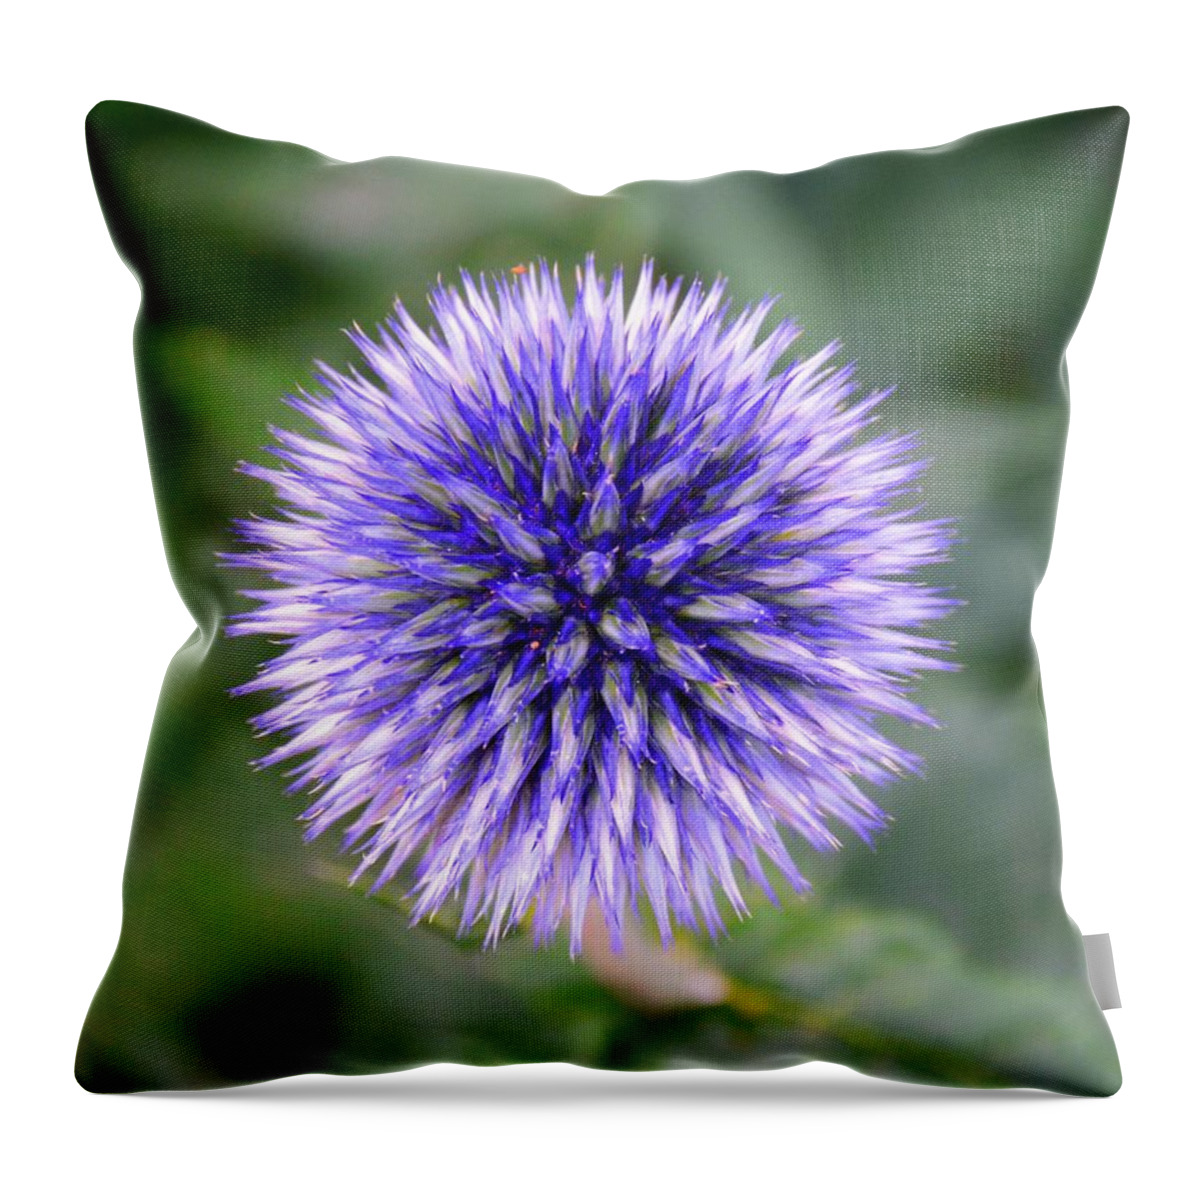 Globe Thistle Throw Pillow featuring the photograph Globe Thistle by Lisa Wooten